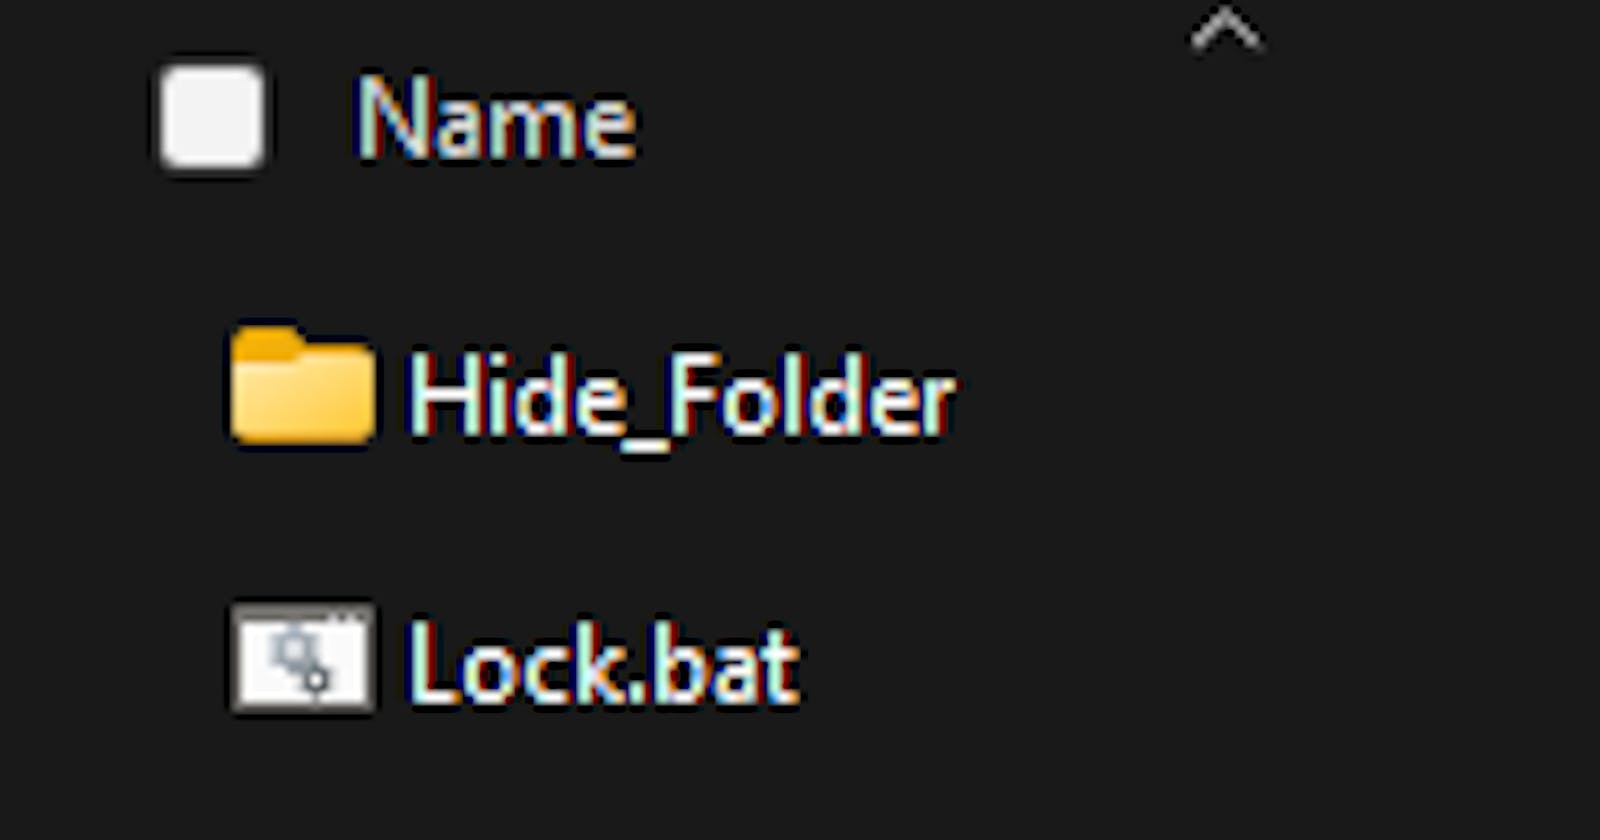 How to Password Protect and Hide Folder in Windows 11